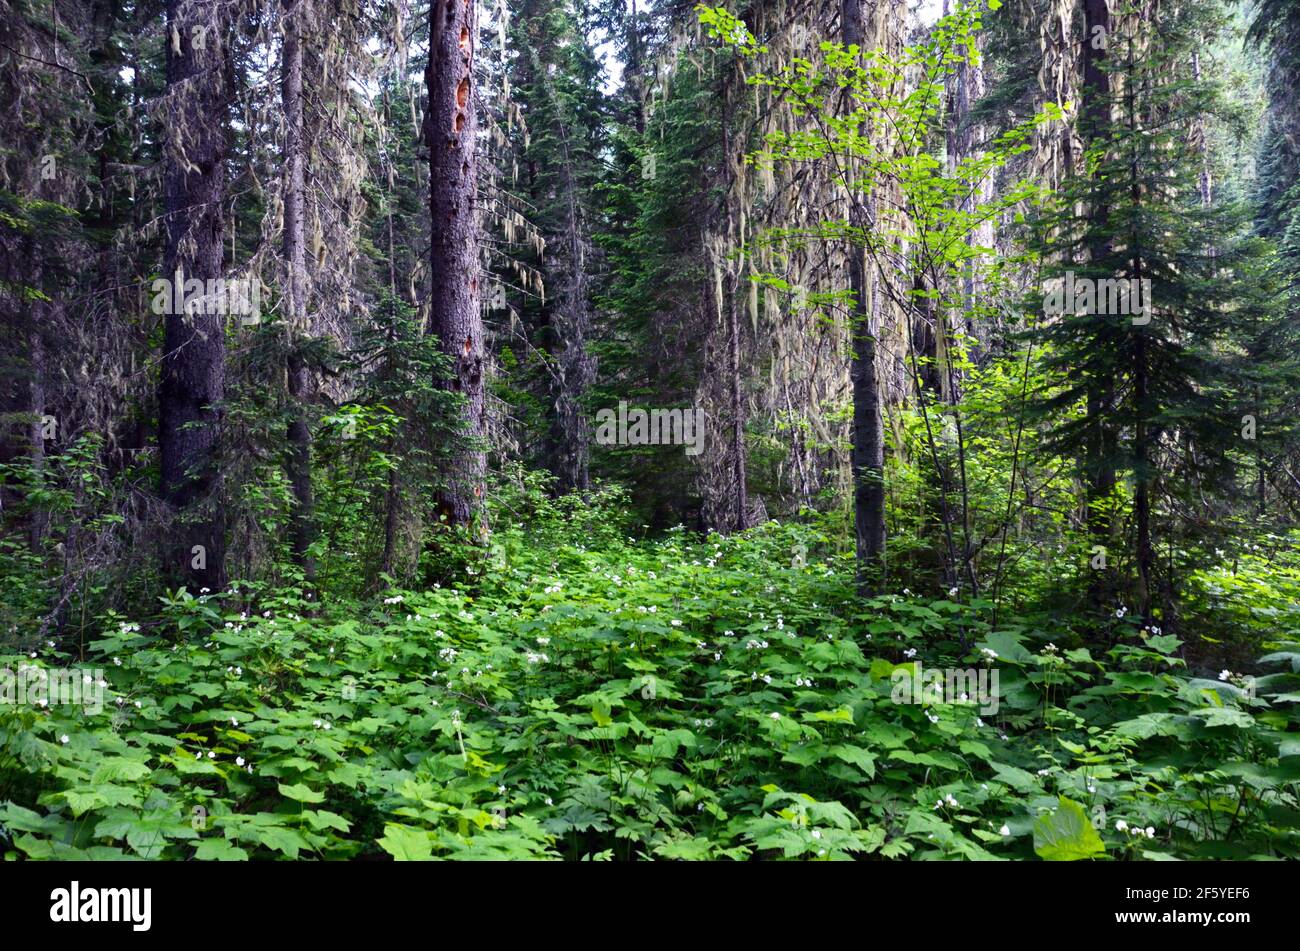 Old-growth forest in the West Fork Yaak Roadless Area. Kootenai National Forest, northwest Montana. (Photo by Randy beacham) Stock Photo